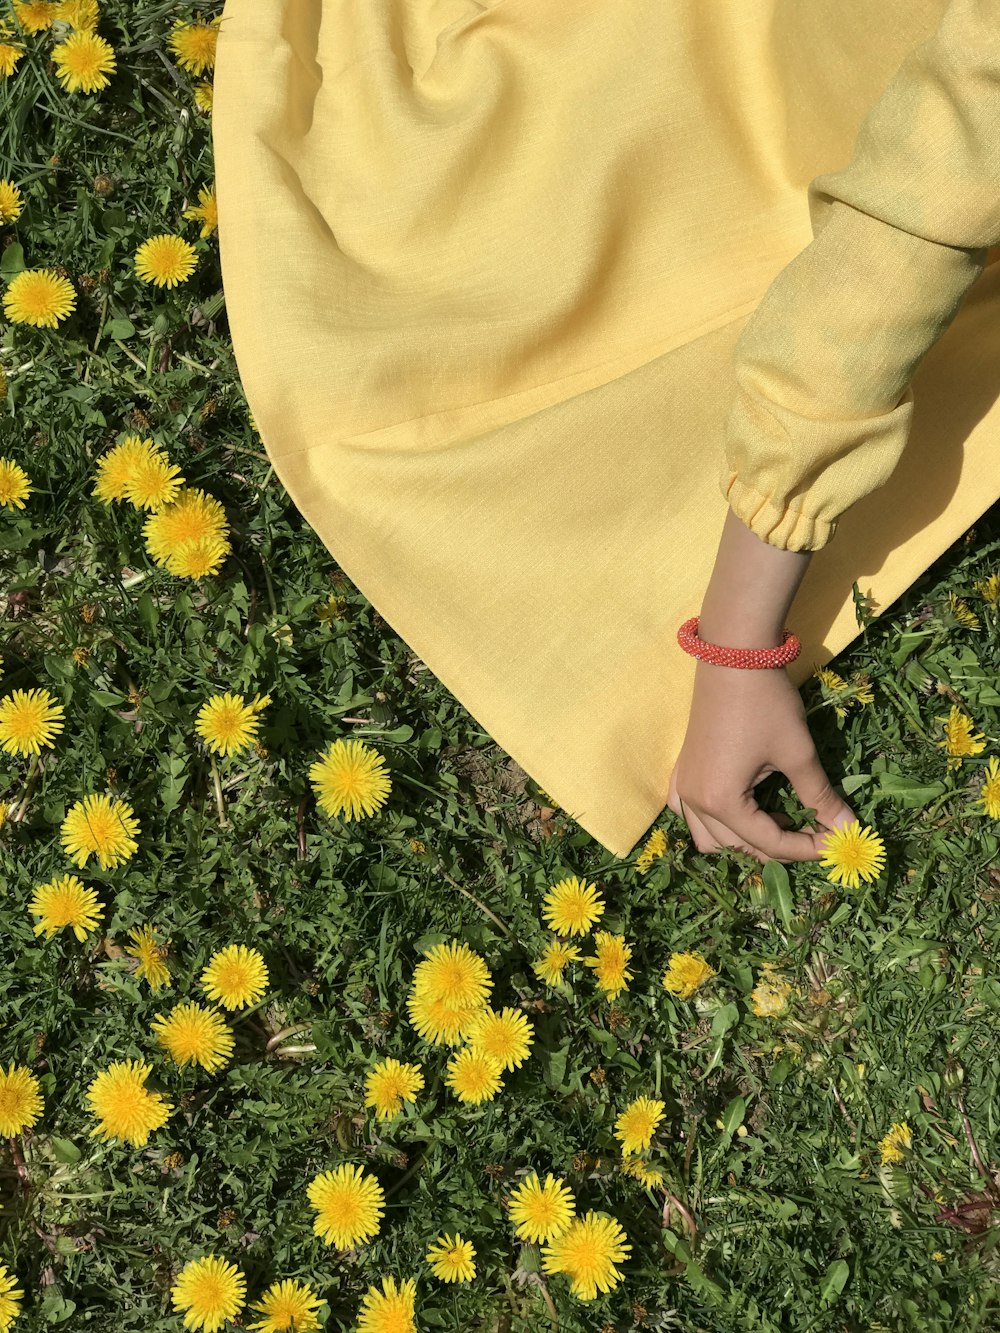 person in brown pants standing on yellow flower field during daytime